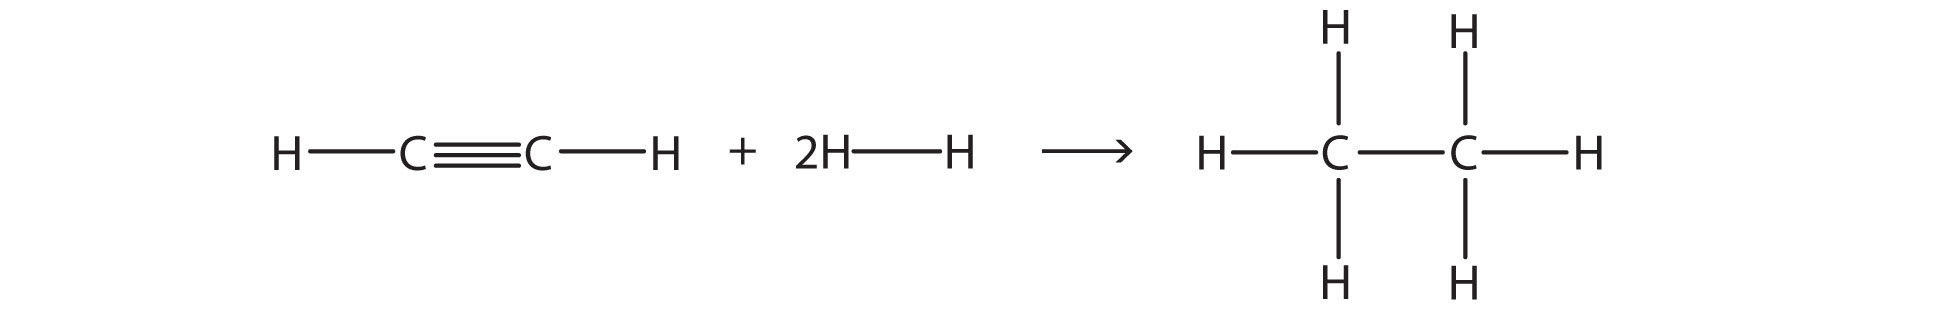 Ethyne reacts with two molecules of hydrogen gas to form ethane. 